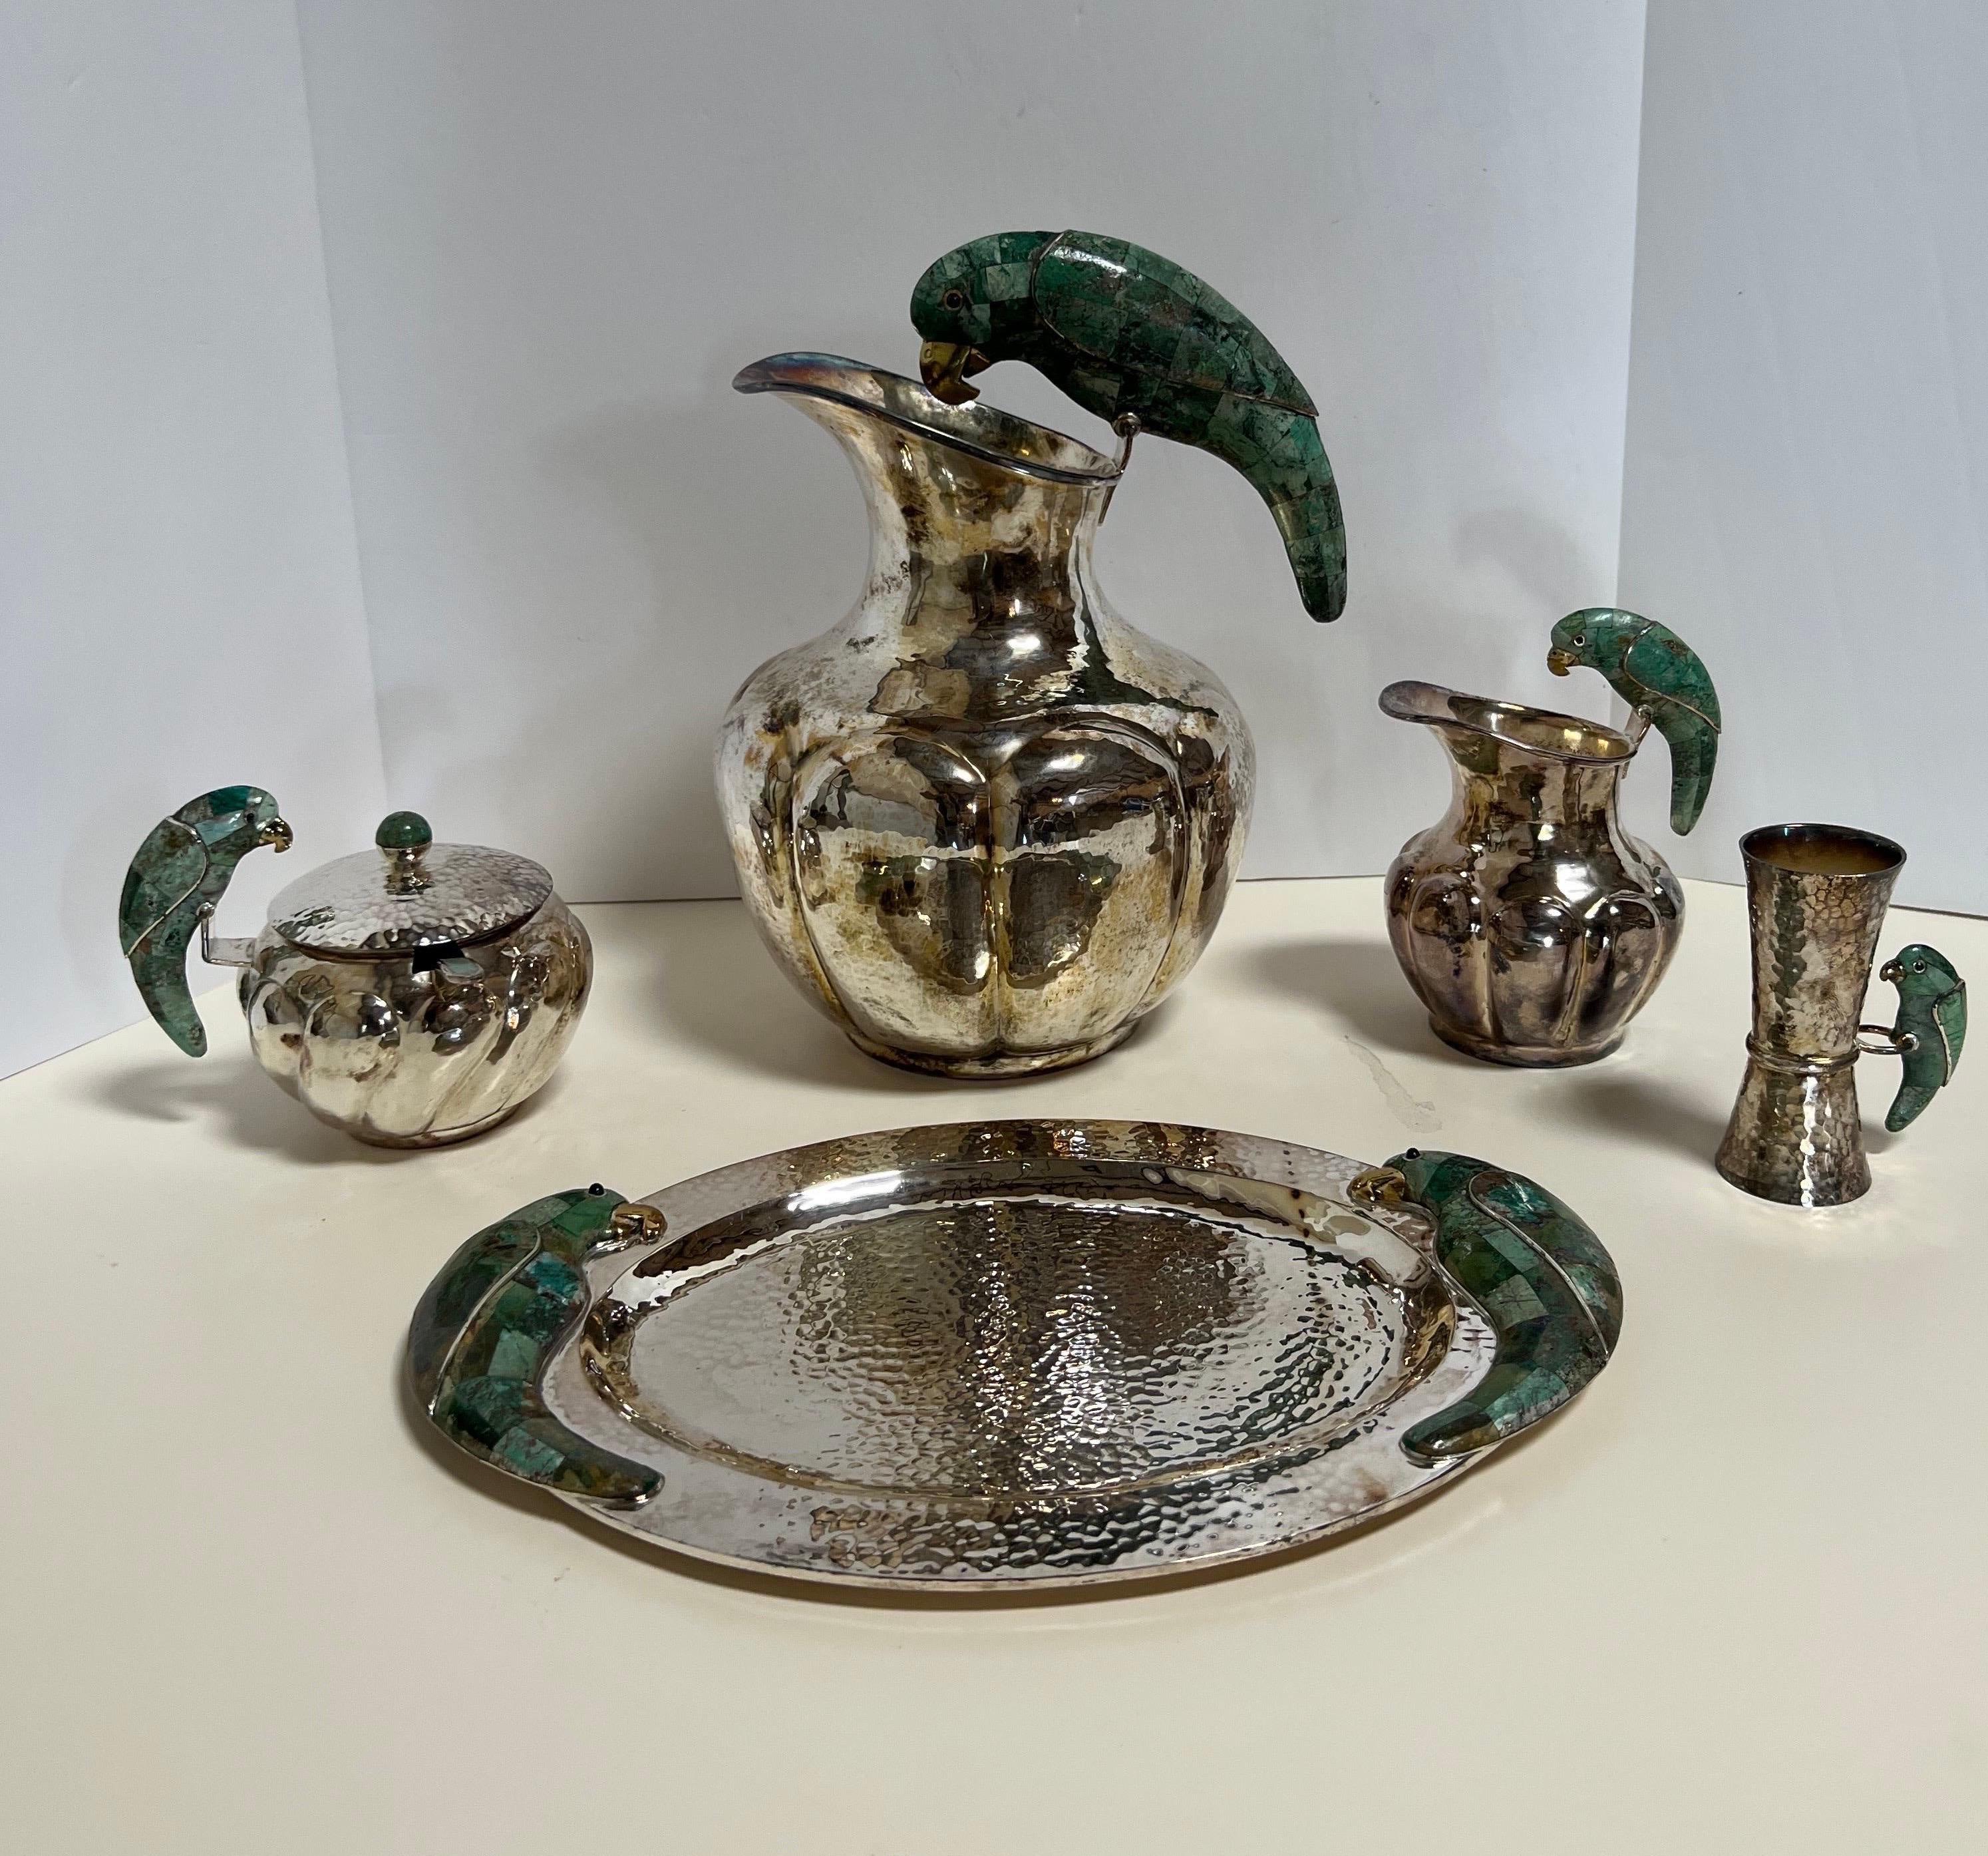 A very fine five-piece hammered silver plate serving set by Los Castillo featuring a malachite parrot motif.

Taxco, Mexico, circa 1950.

All pieces are signed/stamped.

Includes the following 5 pieces:

1. Pitcher

2. Tray

3. Creamer

4. Sugar